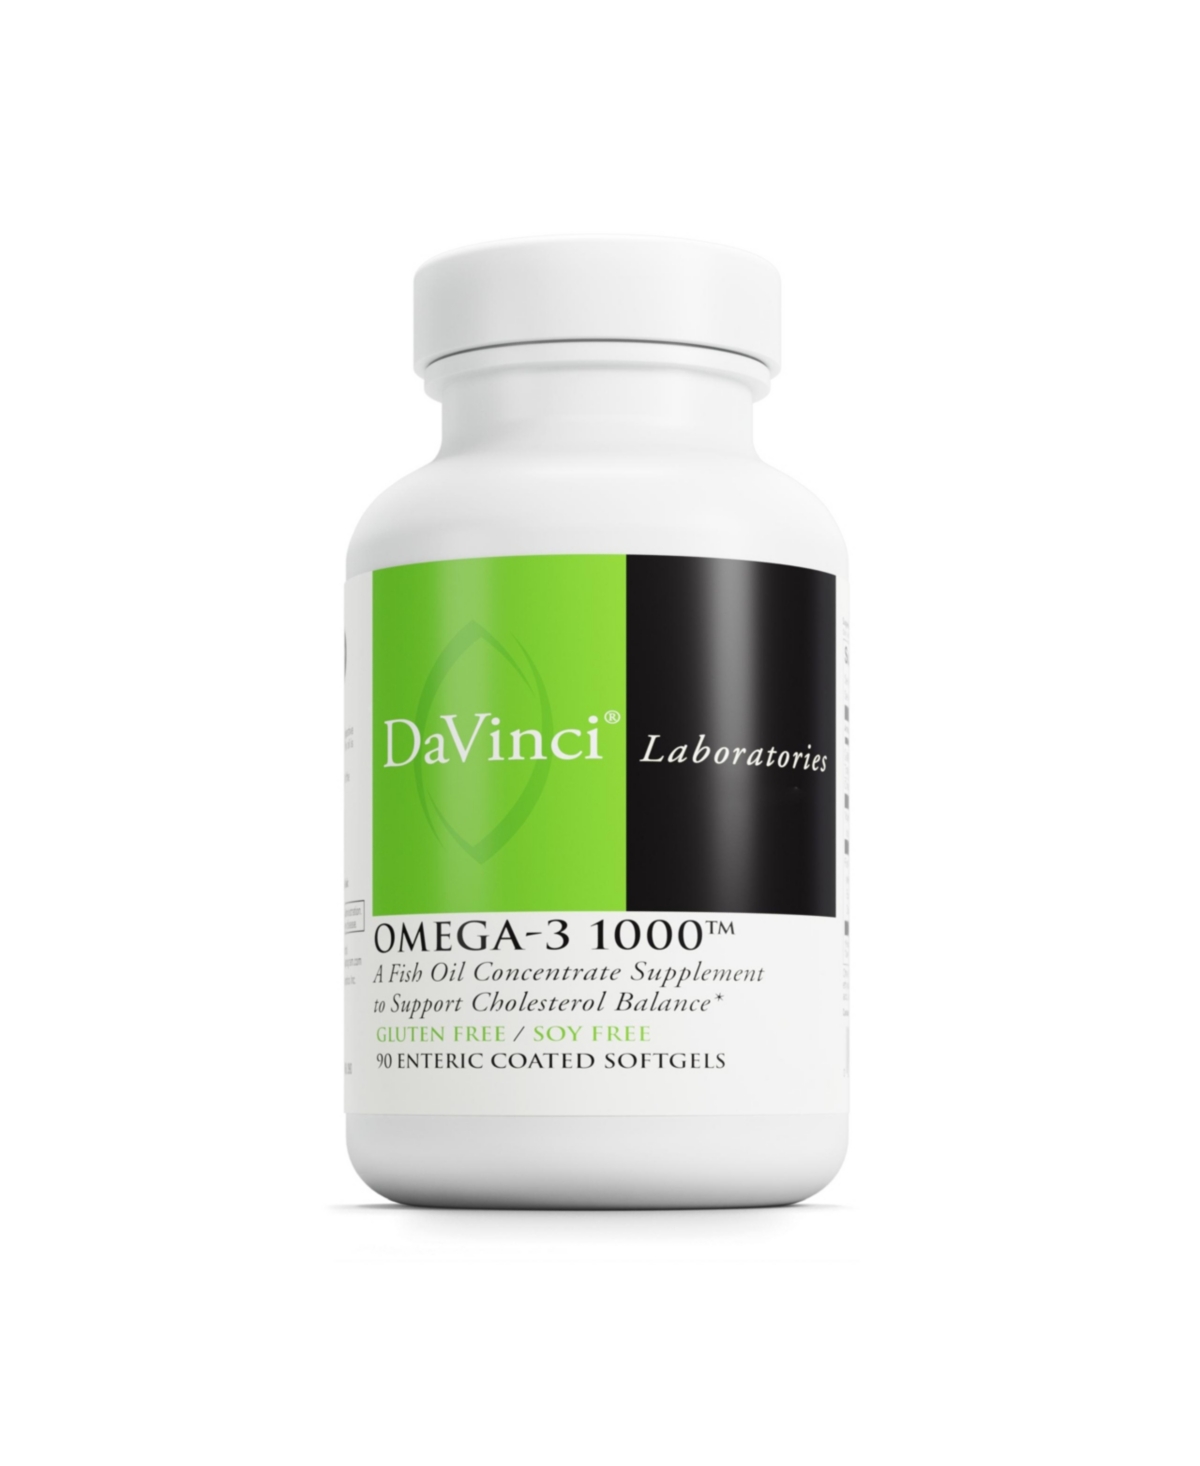 DaVinci Labs Omega-3 1000 - Dietary Supplement to Maintain Already Normal Cholesterol Levels and Support Immune System, Hair and Skin - Gluten-Free